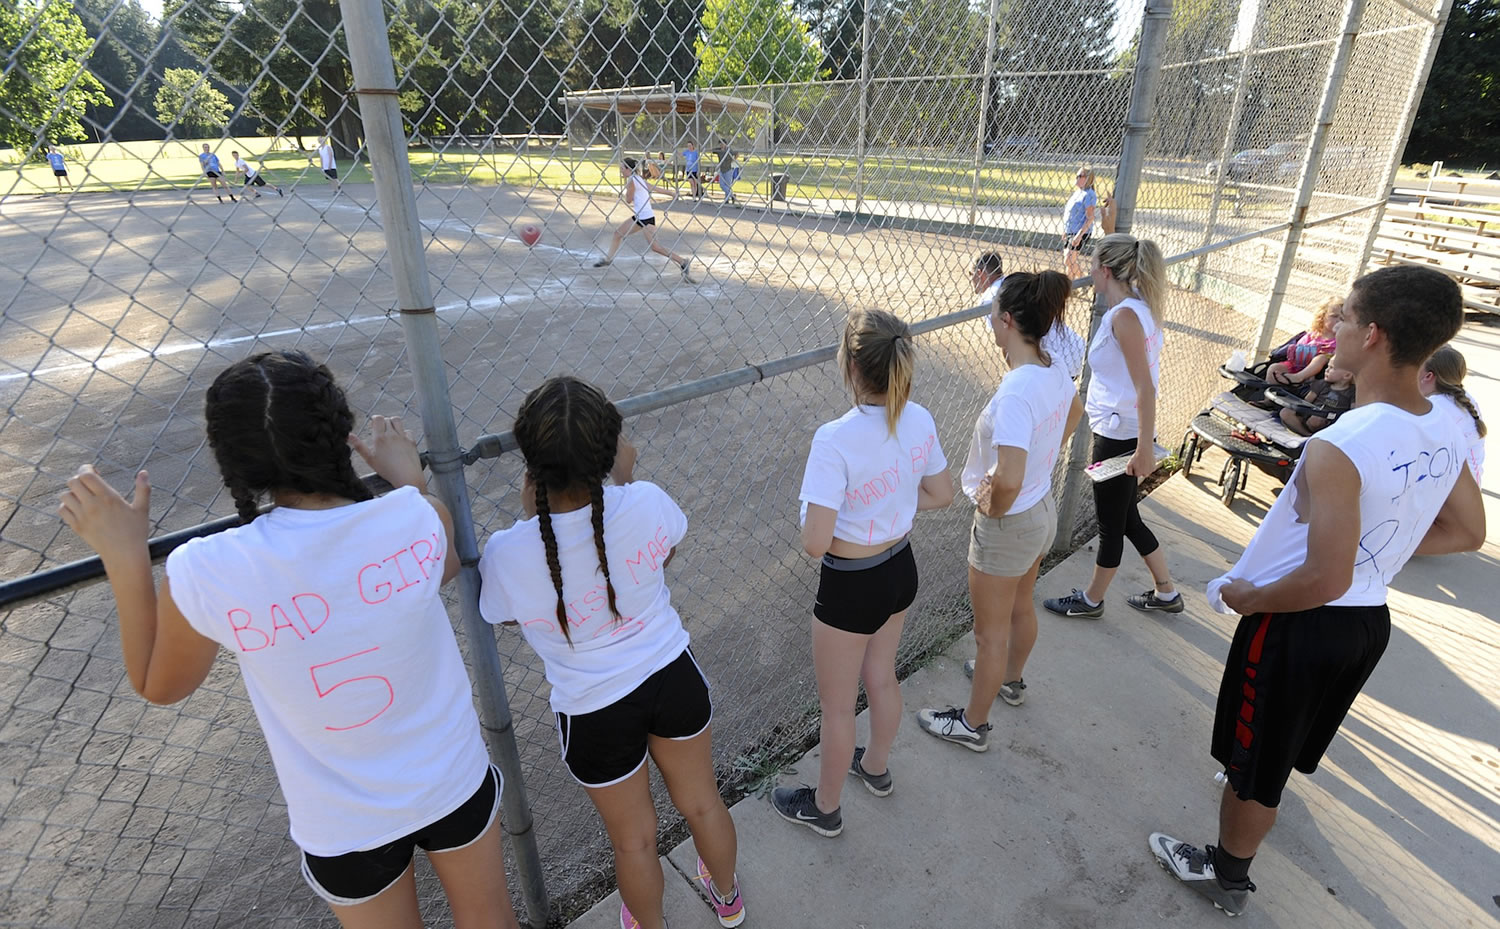 The Ballics watch from their dugout as a teammate kicks the ball at David Douglas Park on a Thursday in late June.